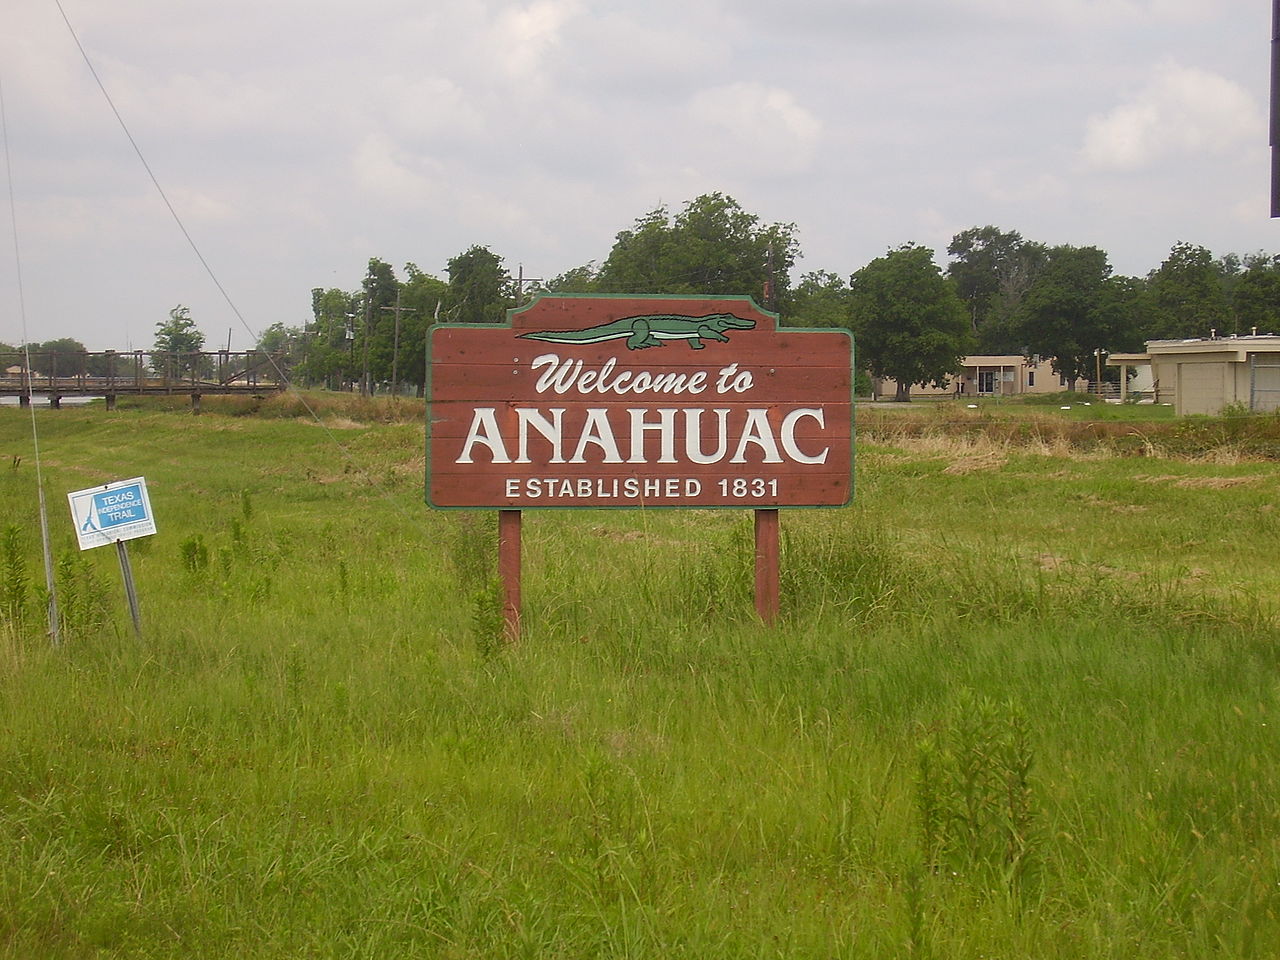 Haus and Hues in Anahuac